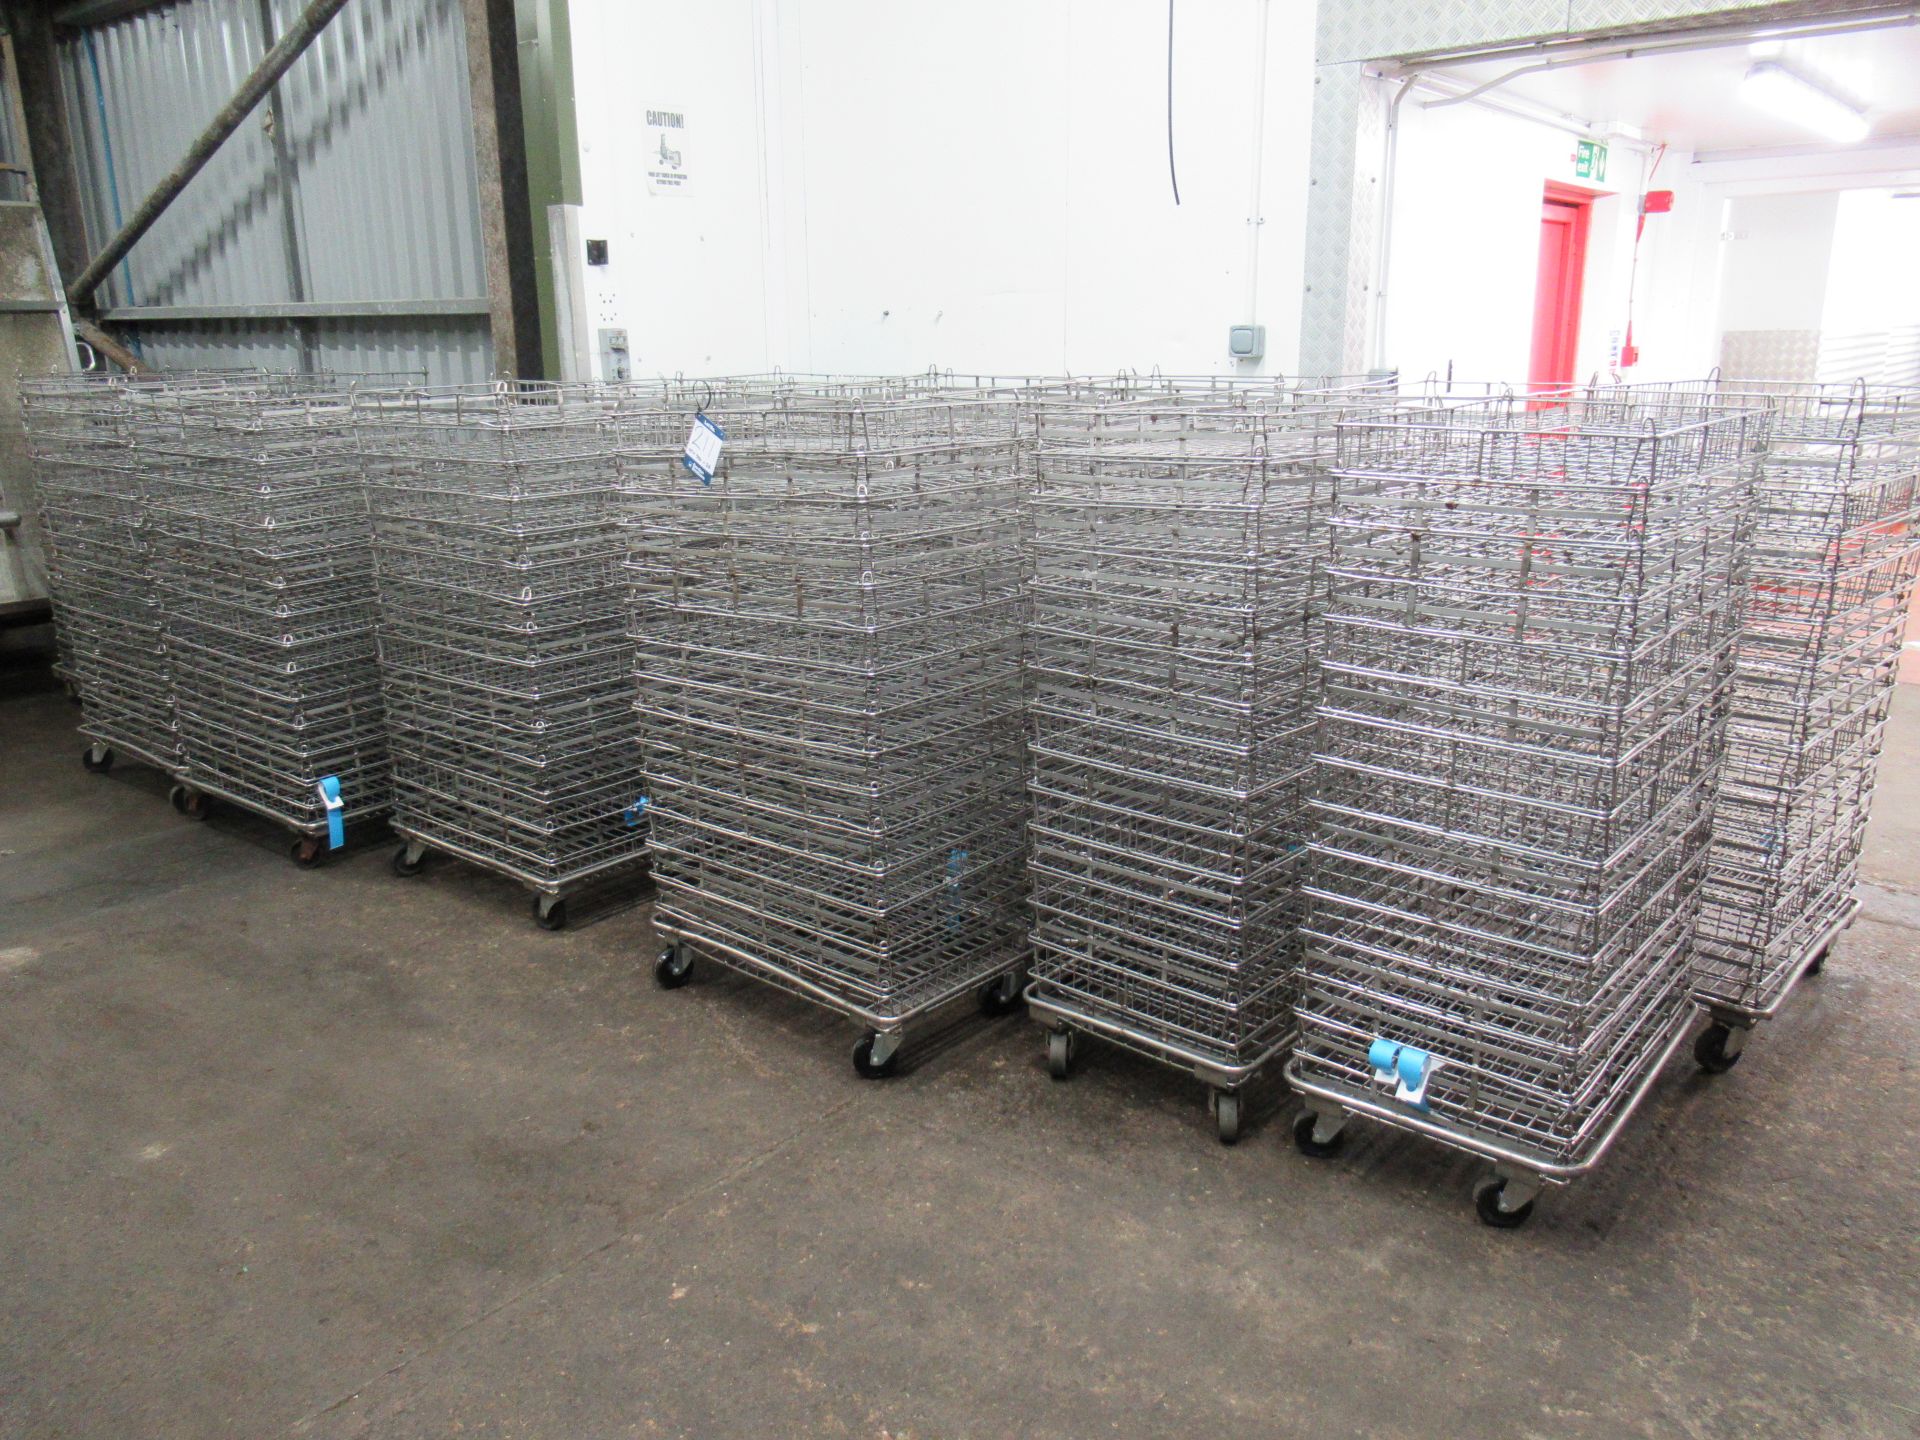 420 Stainless steel wire mesh stacking baskets, 800 x 520 x 75mm high, with 30 dollies